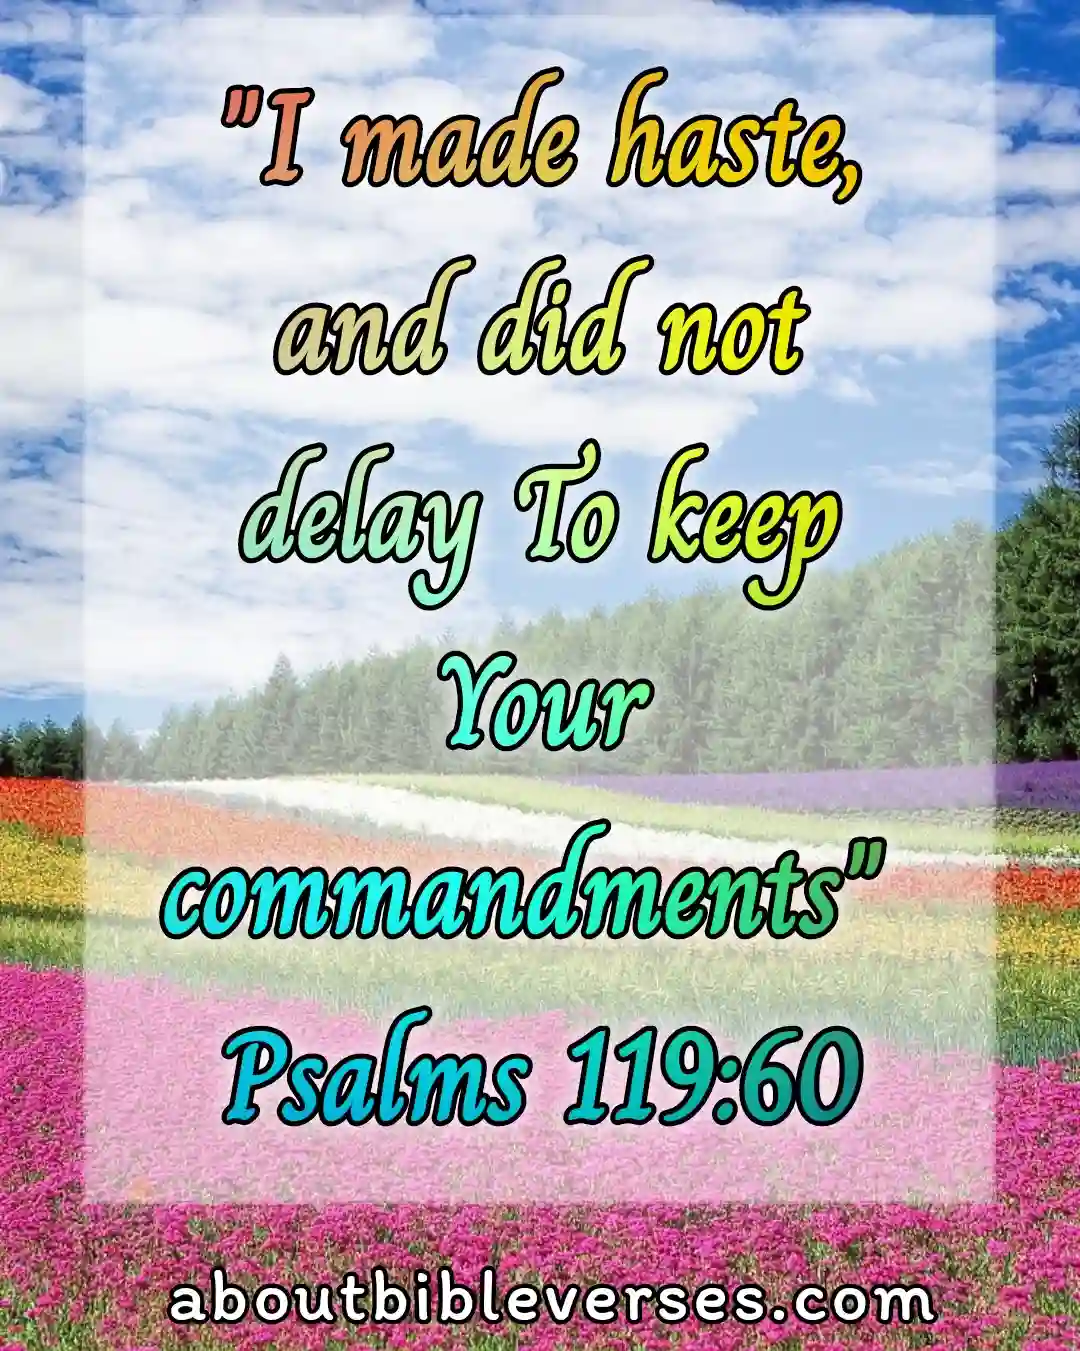 Today bible verse (Psalm 119:60)